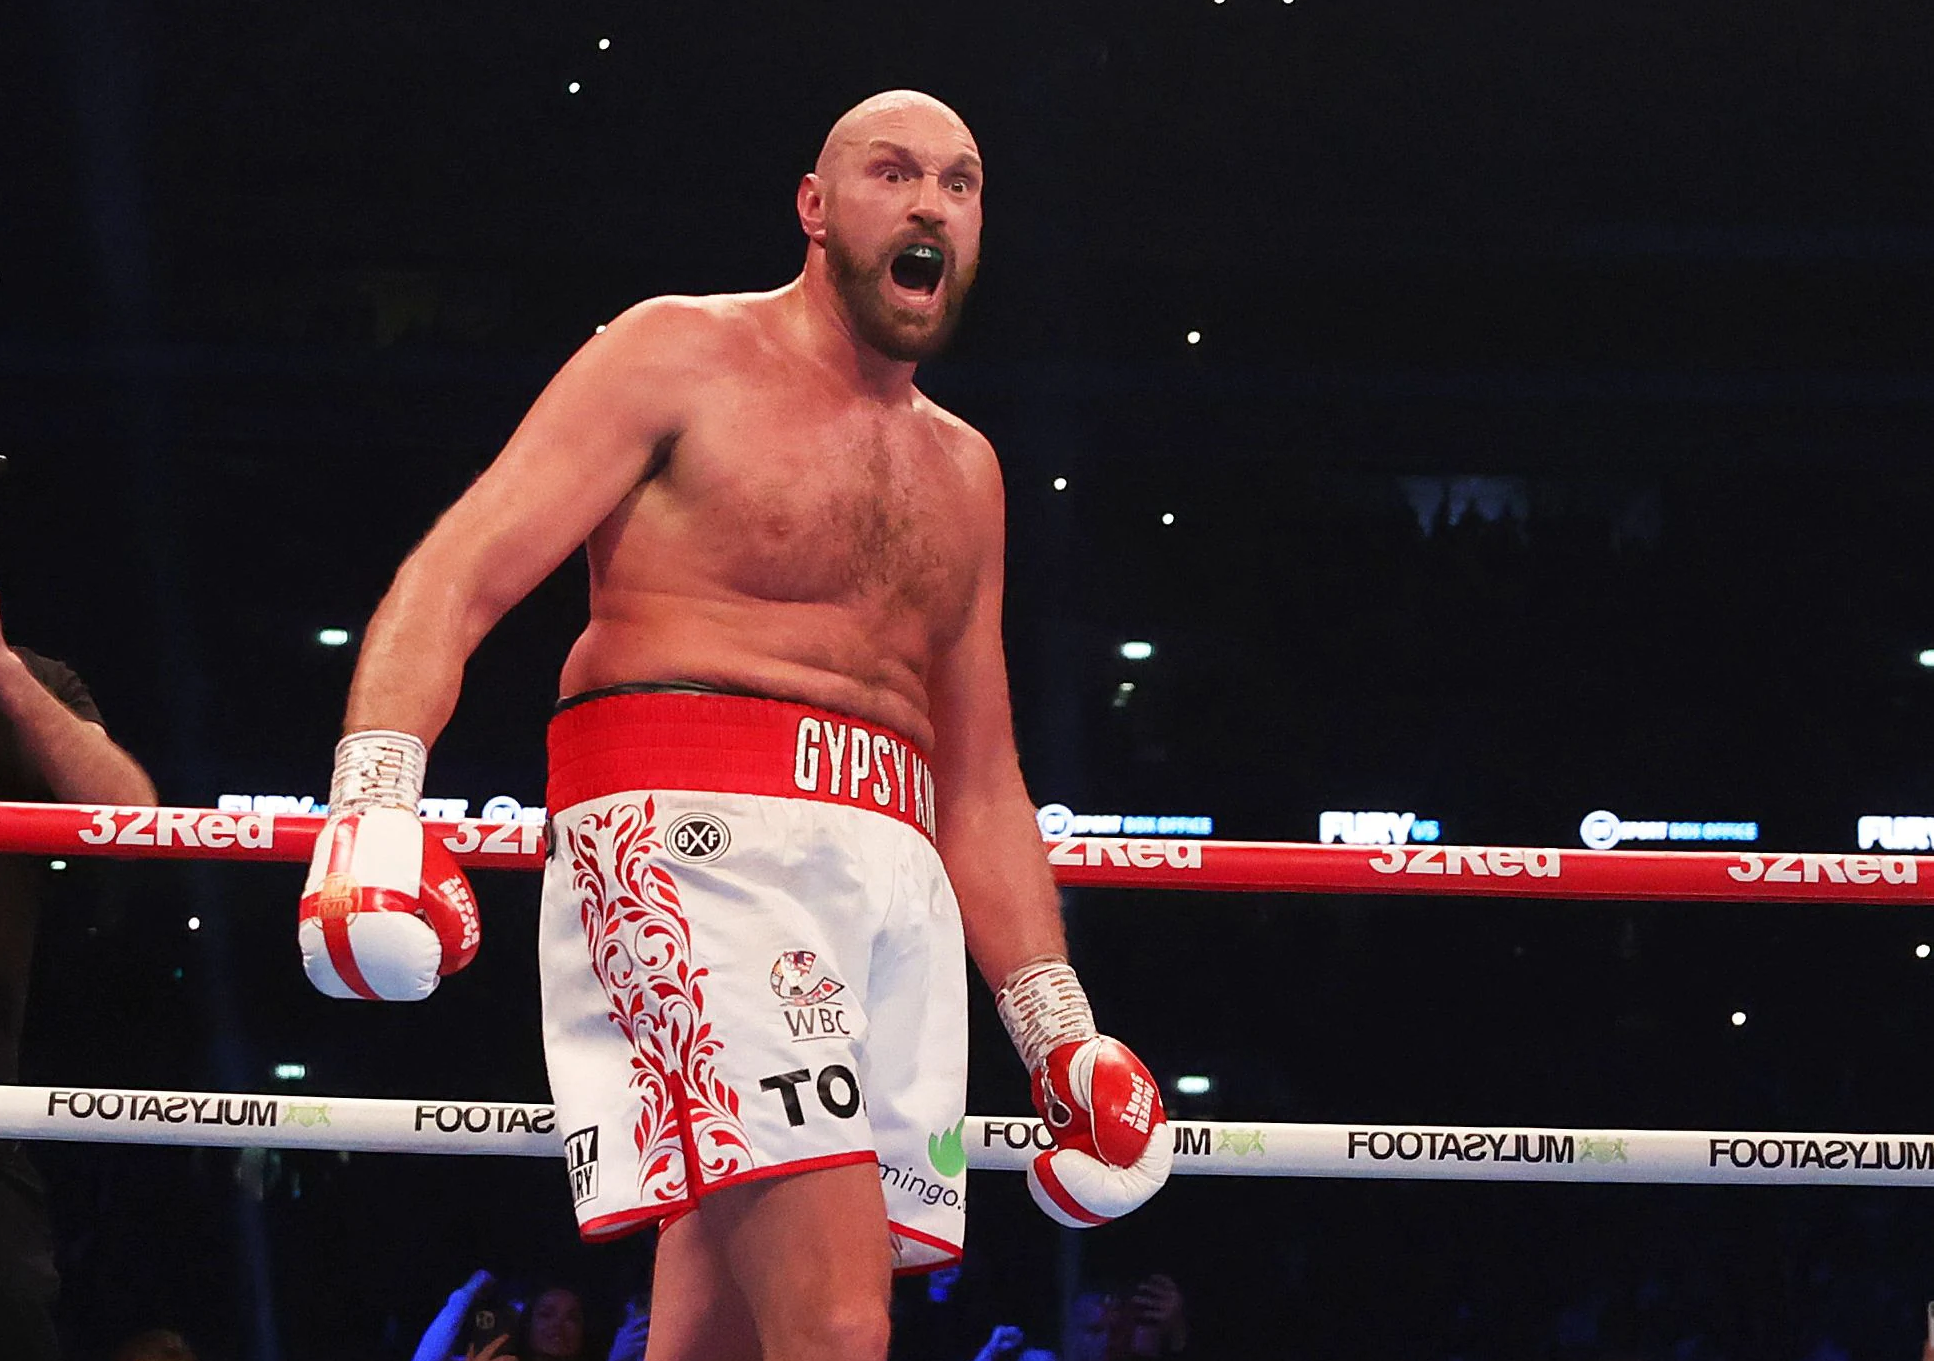 Tyson Fury hints at retirement after knocking out Whyte